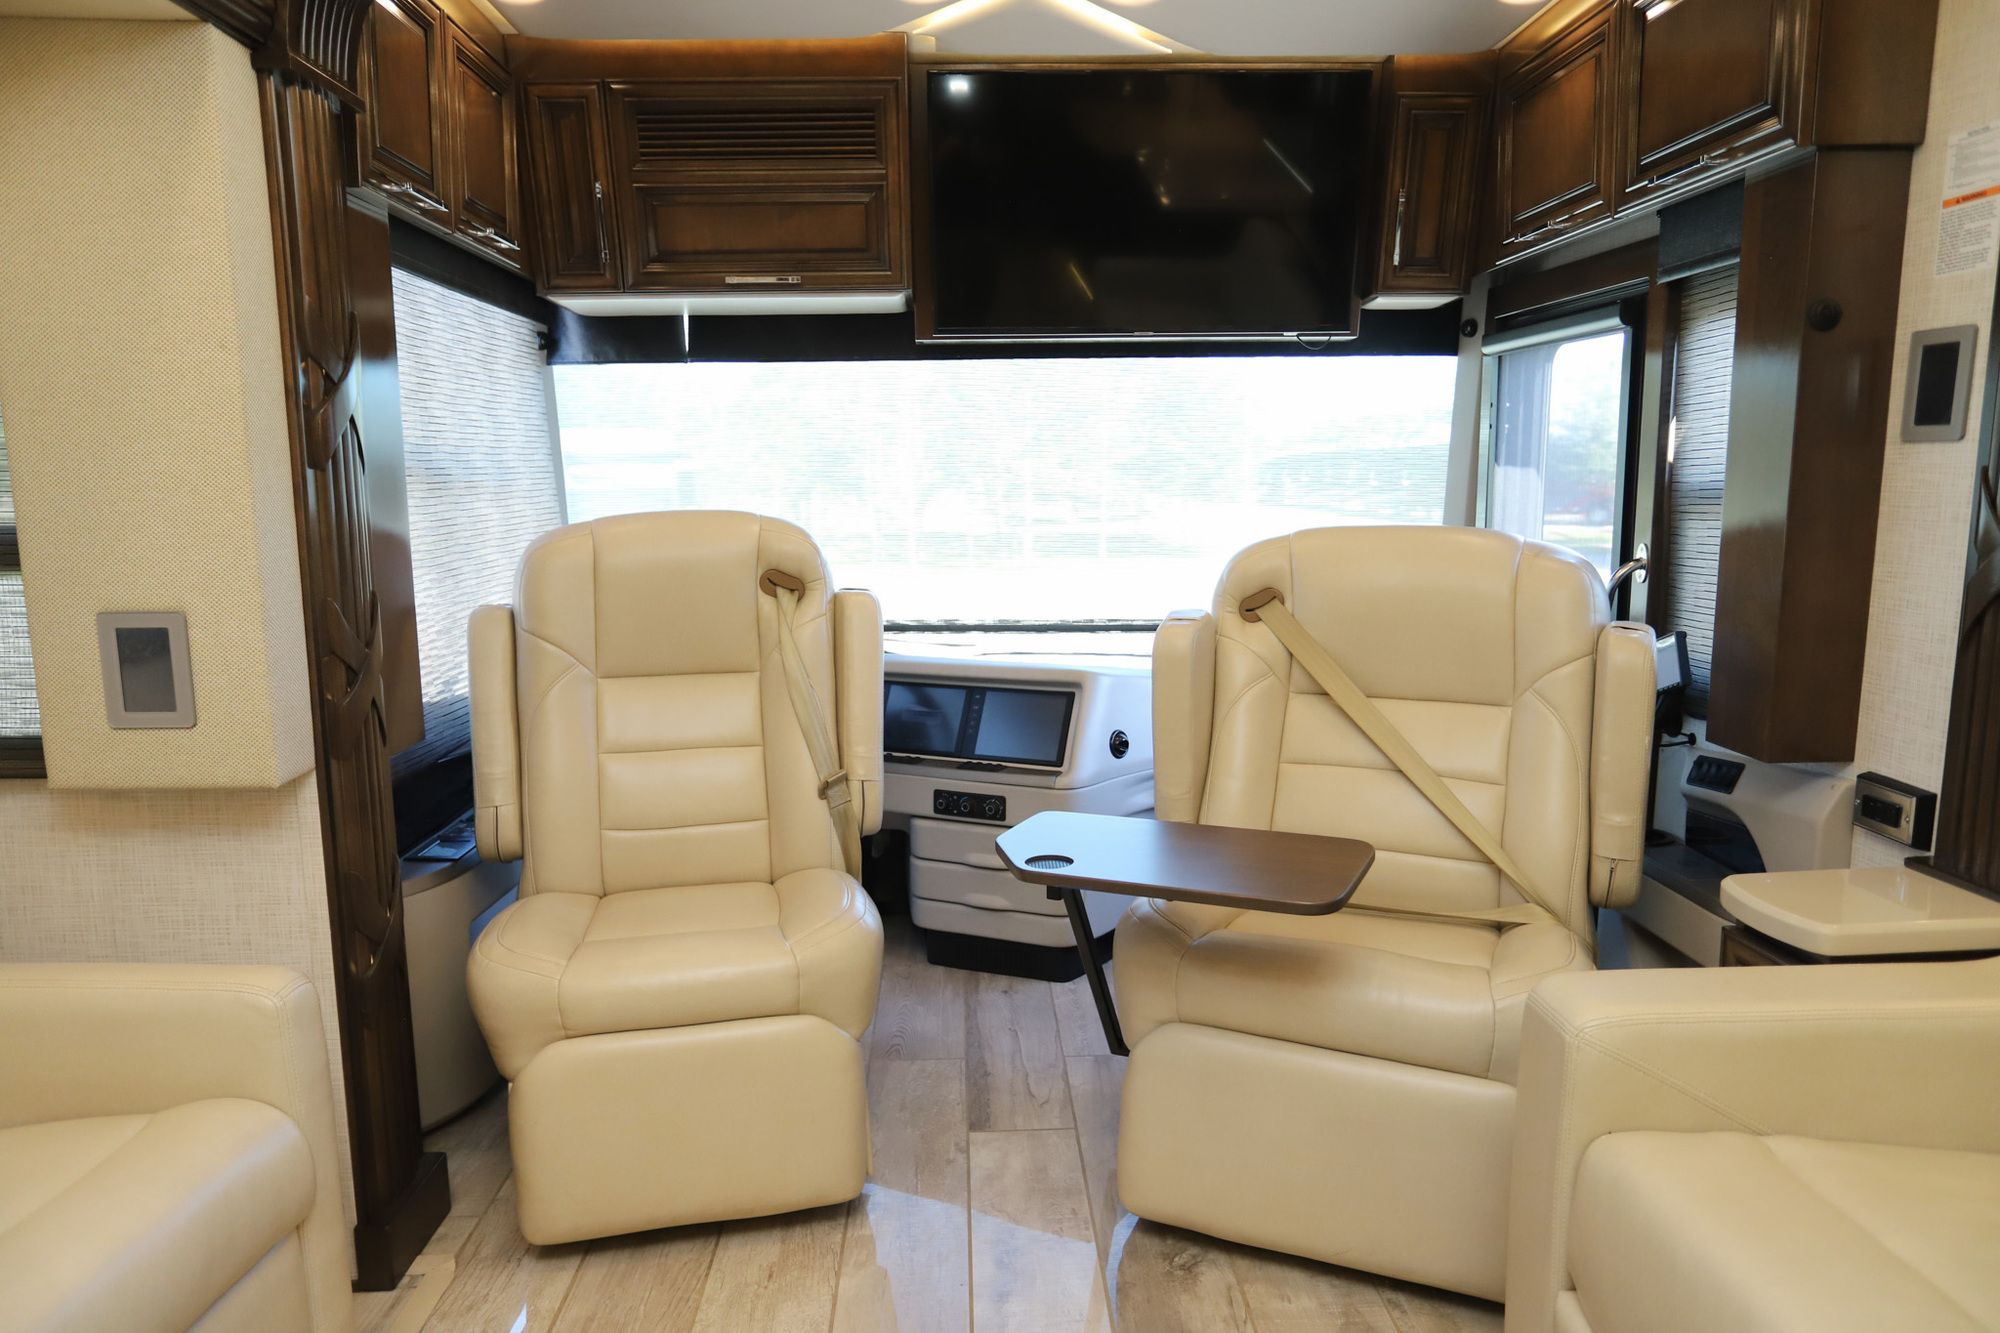 Used 2020 Newmar Mountain Aire 4551 Class A  For Sale